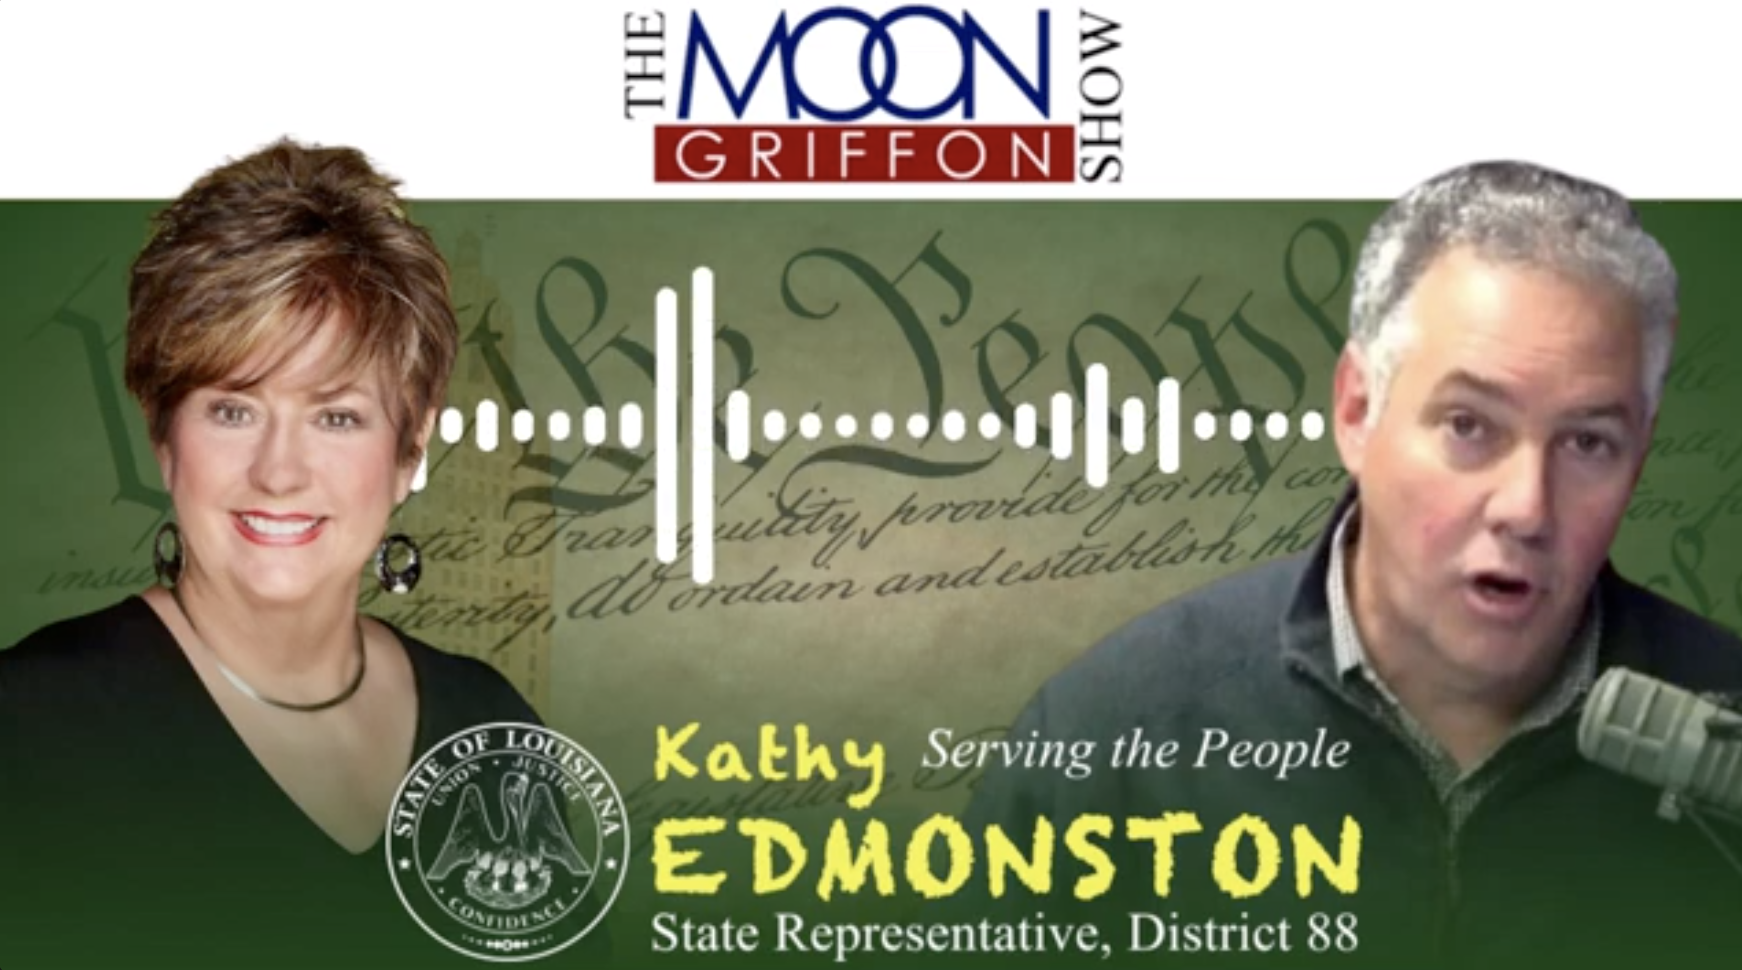 Conversations with Kathy Edmonston & Moon Griffon: District 88 and Beyond